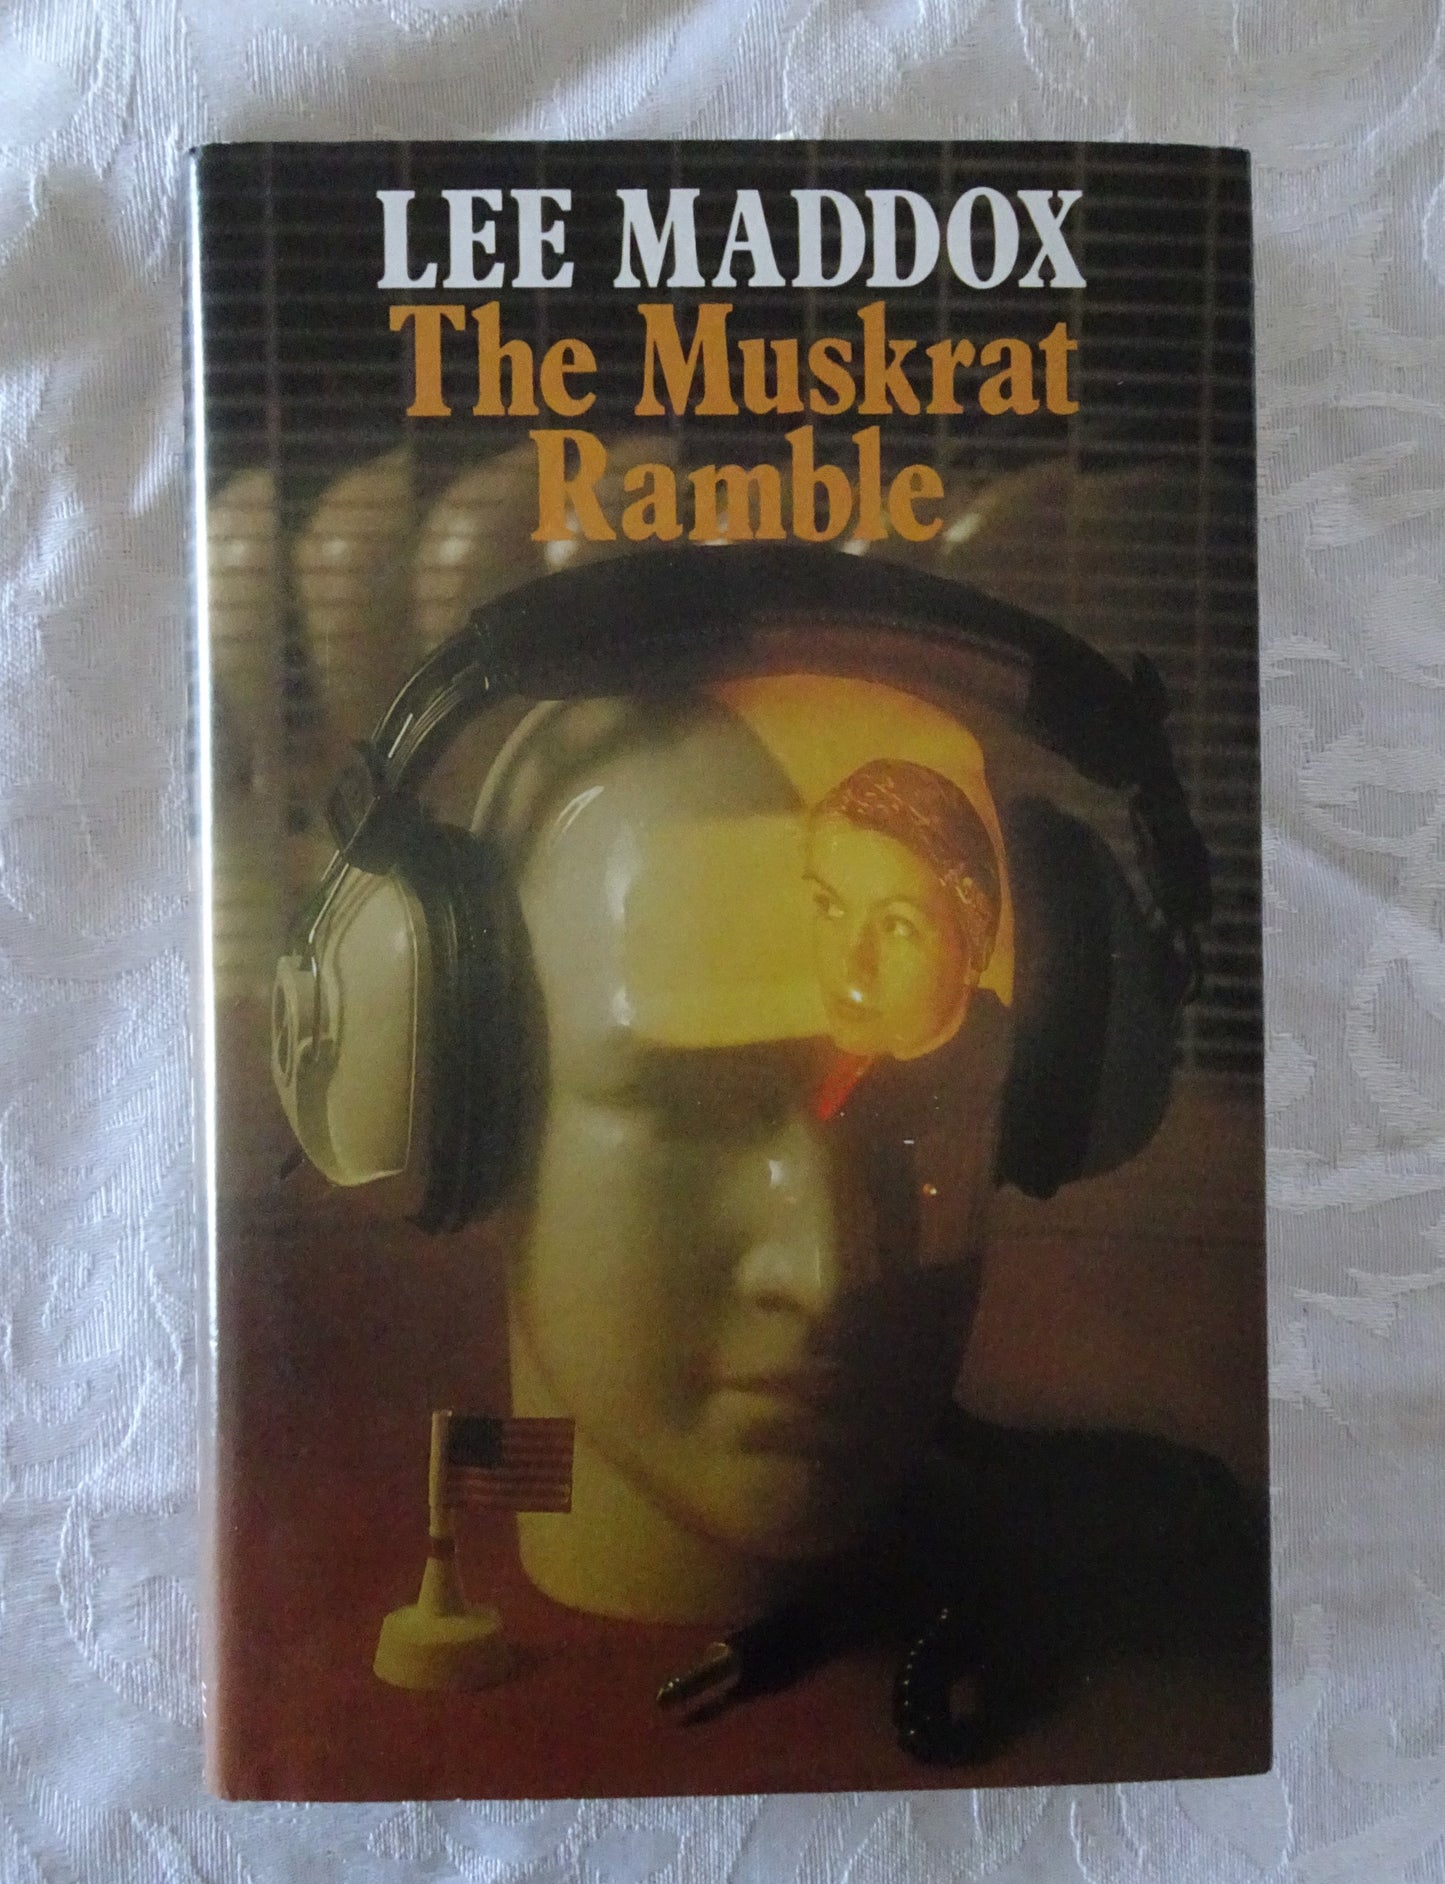 The Muskrat Ramble by Lee Maddox